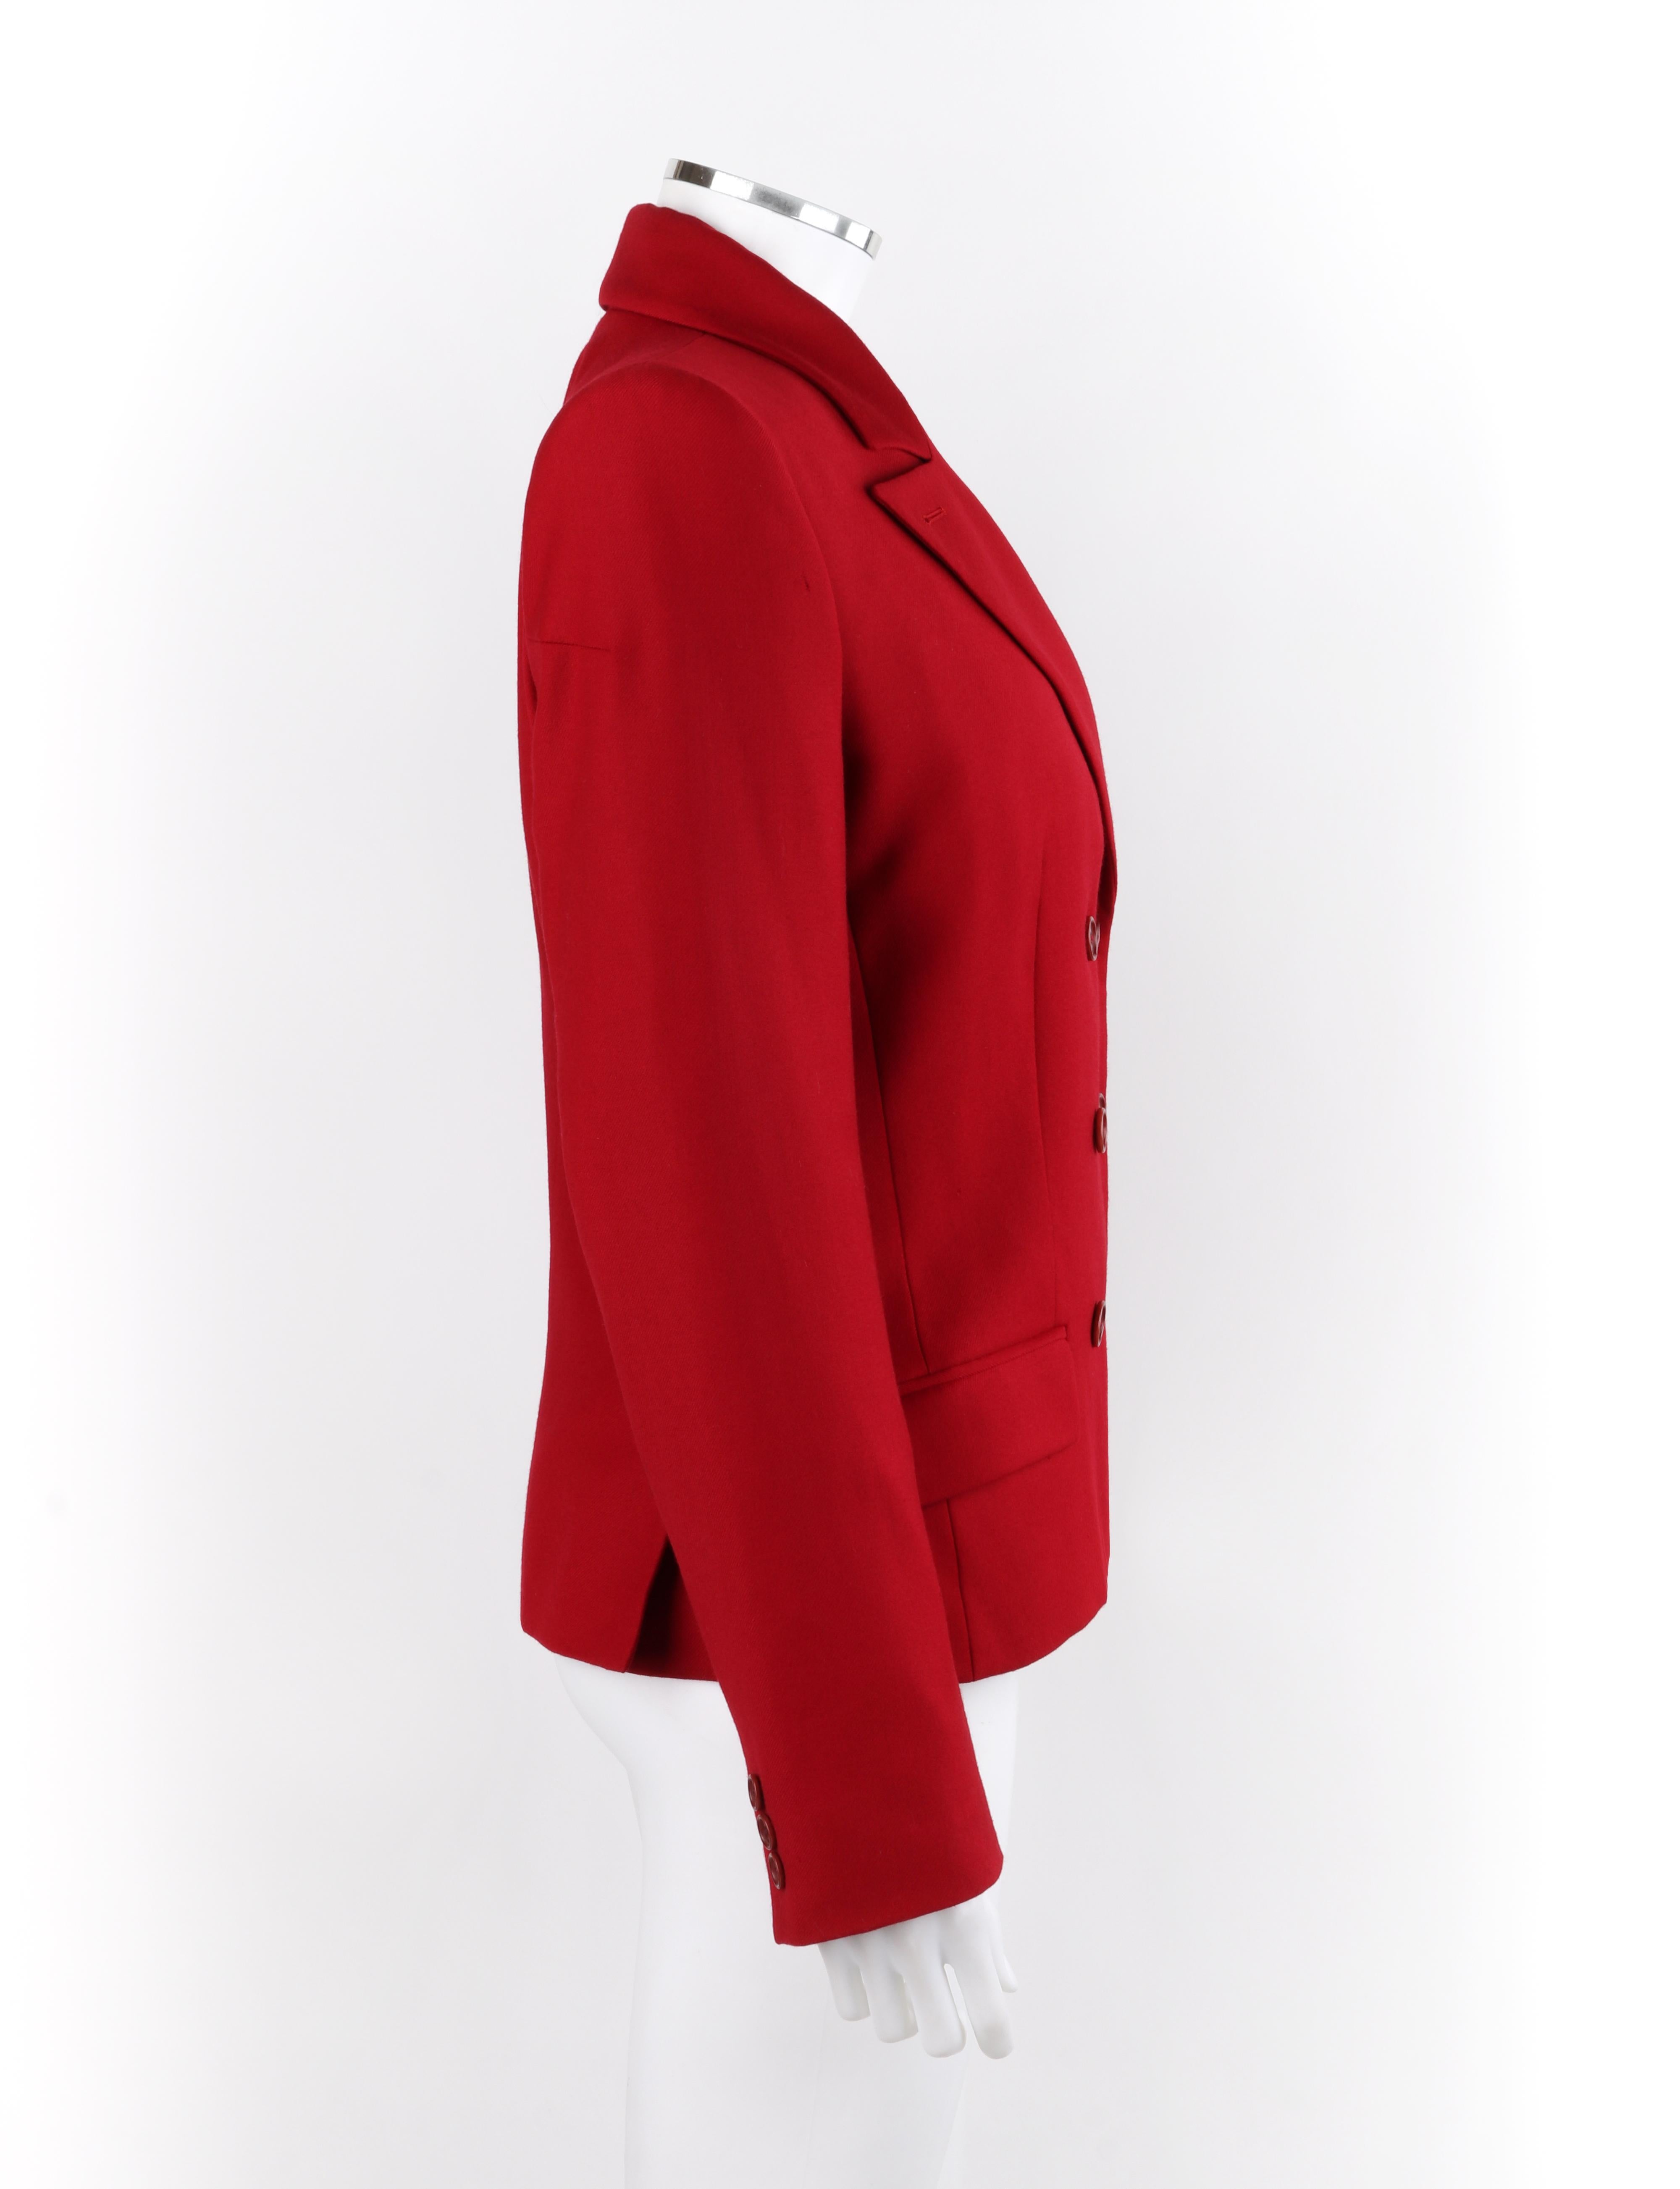 ALEXANDER McQUEEN A/W 1998 “Joan” Red Double Breasted Button Front Blazer Jacket In Fair Condition For Sale In Thiensville, WI